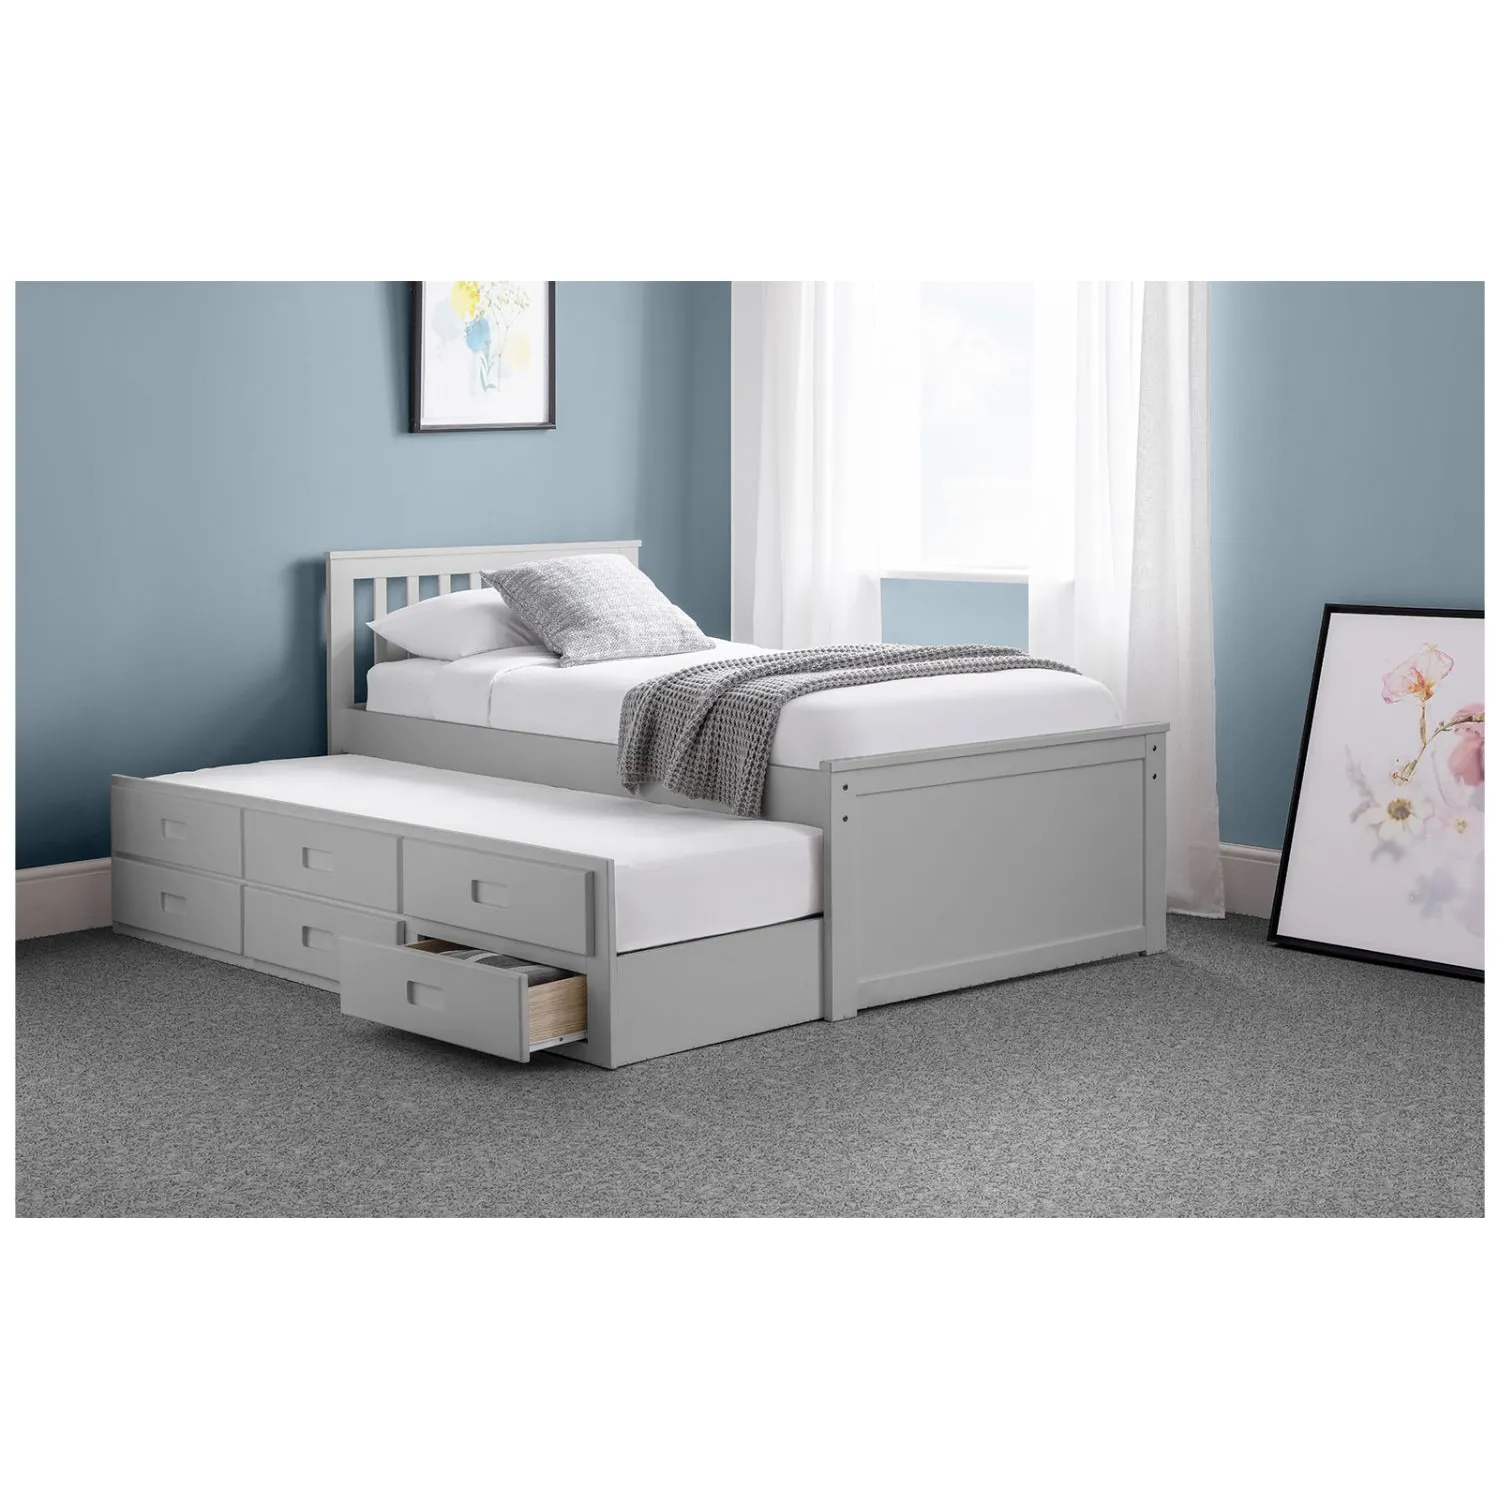 Maisie Bed with Underbed and Drawers Light Grey